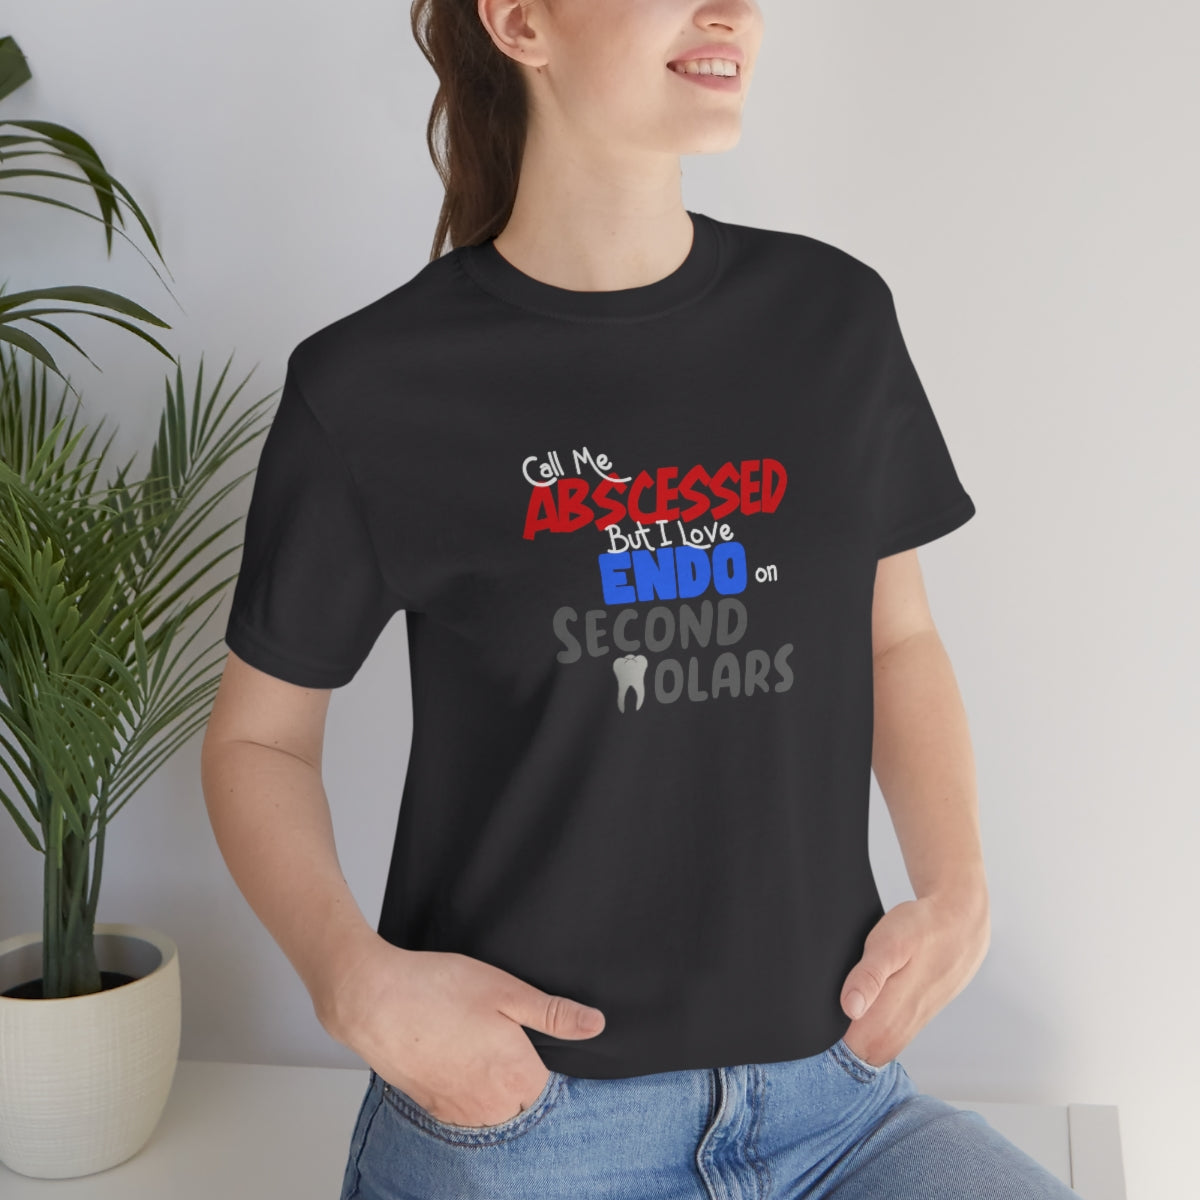 Call Me Abscessed Unisex Jersey Short Sleeve Tee